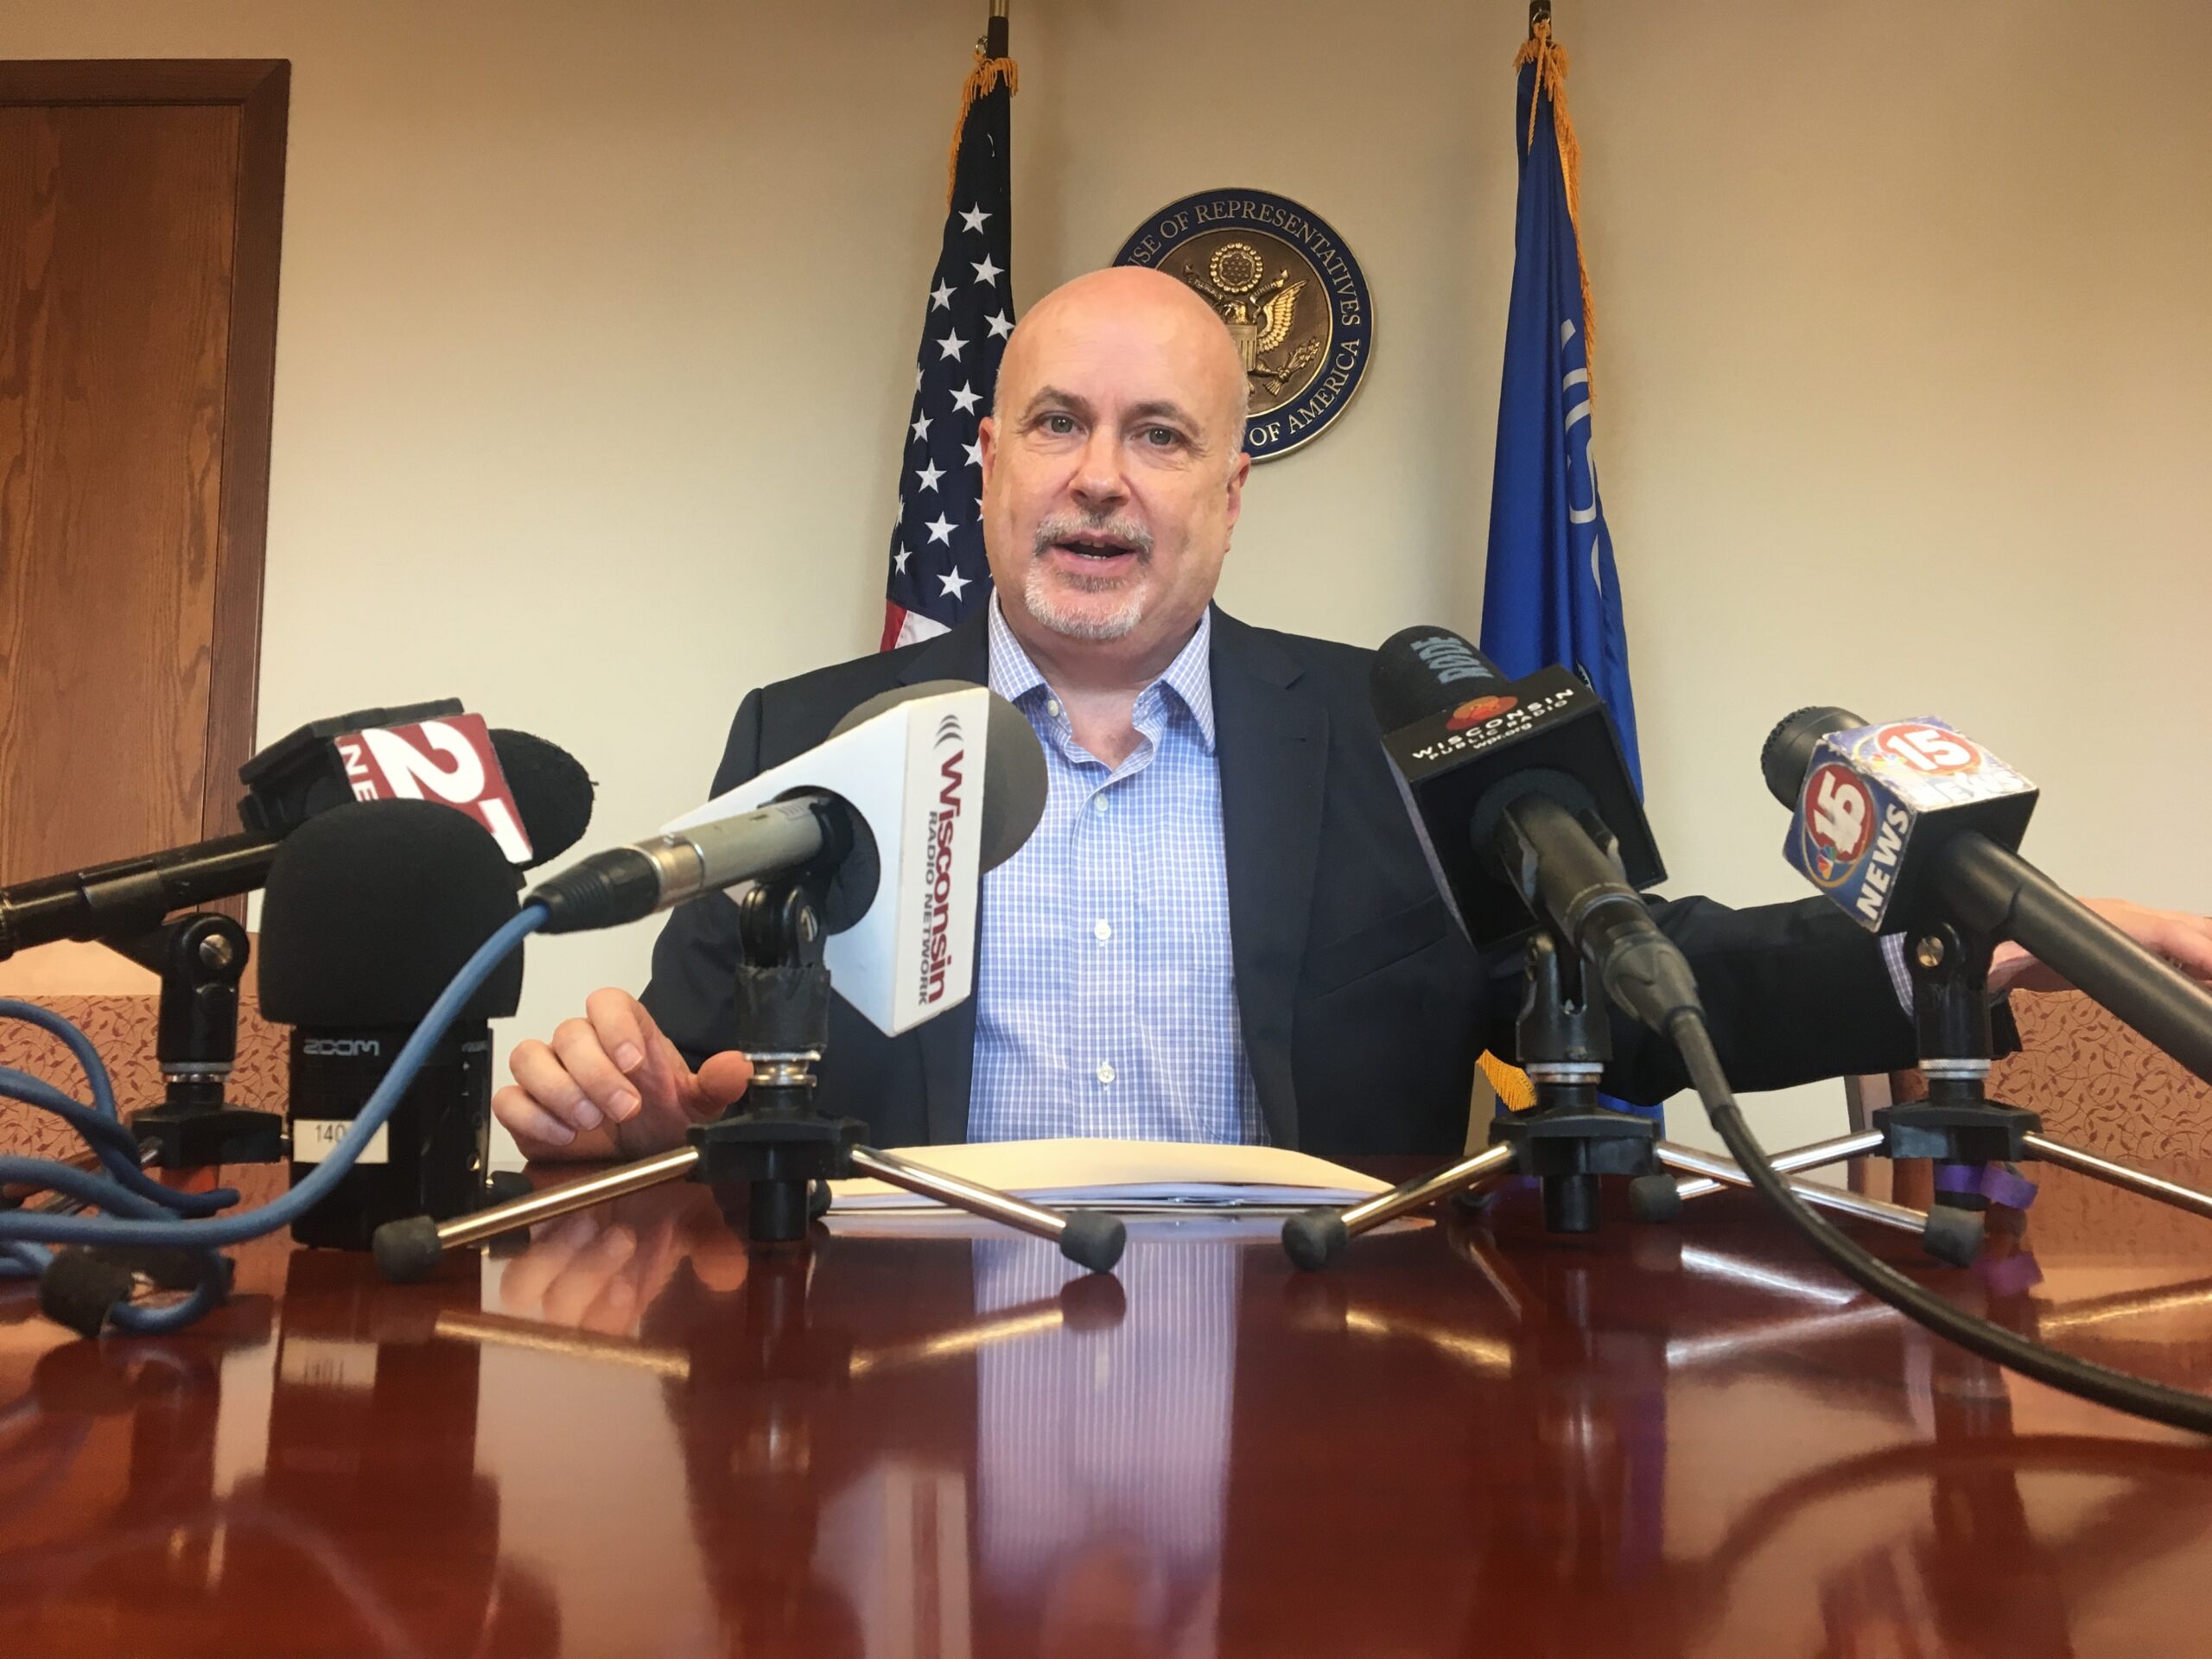 U.S. Rep Mark Pocan speaks at a press conference